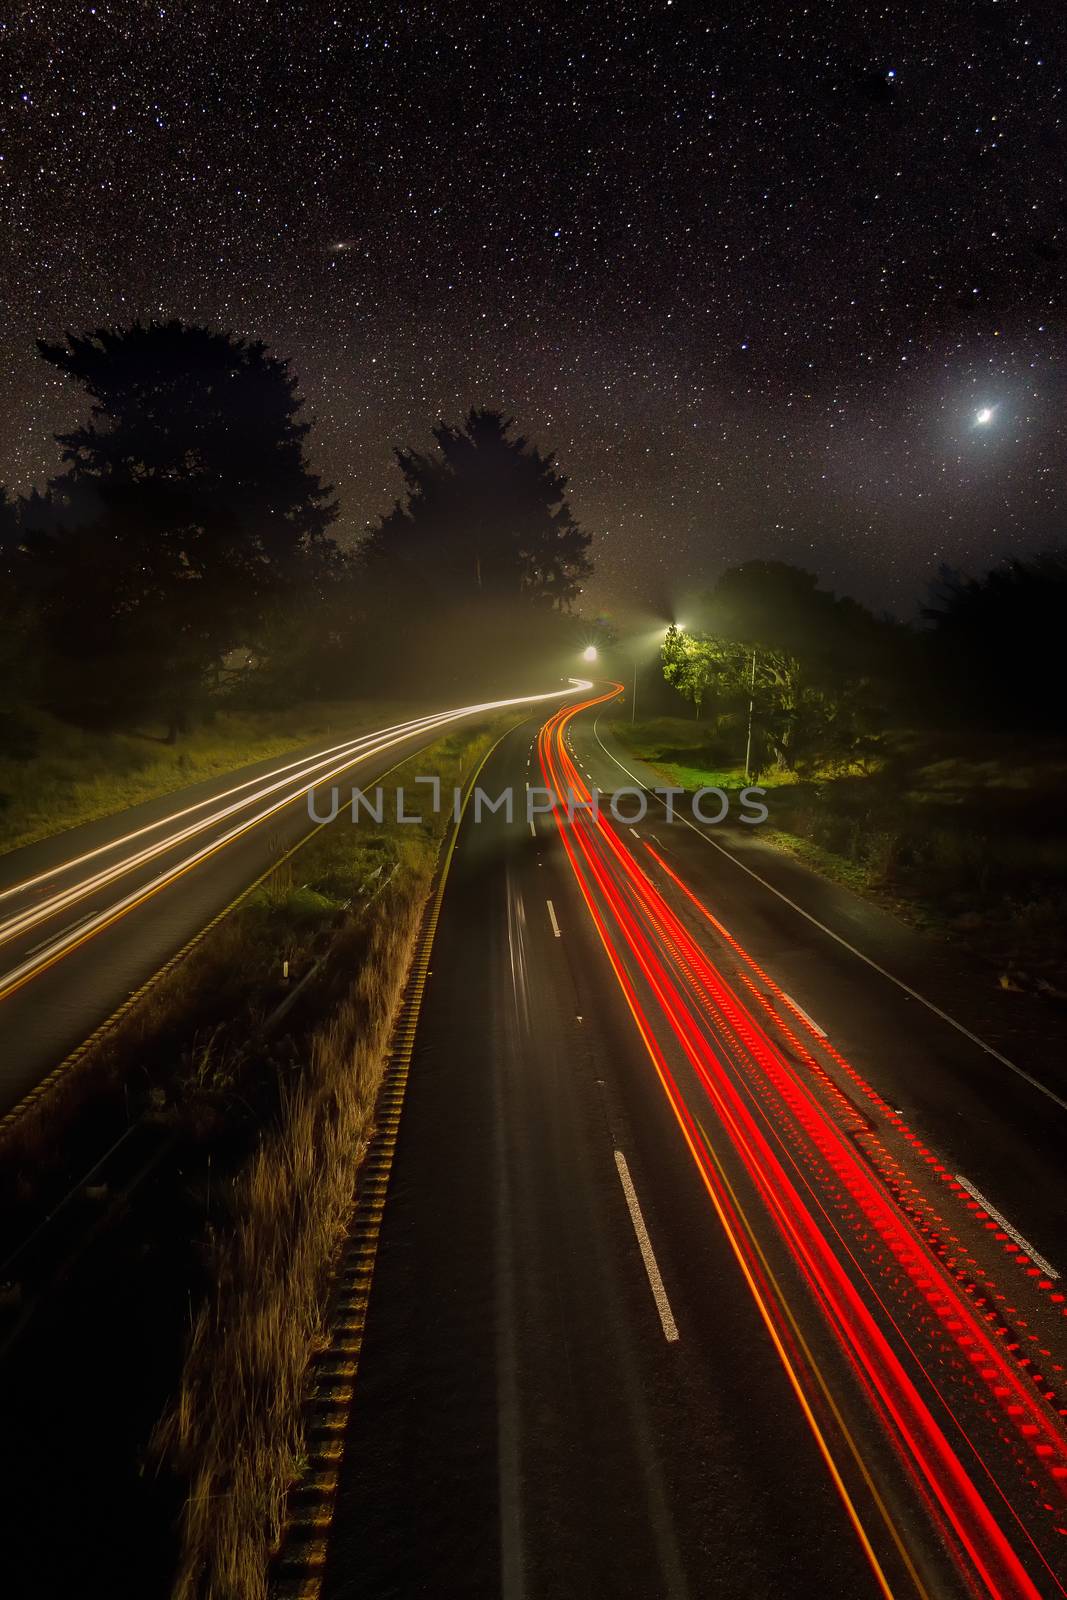 Night Image of Cars on a Highway Under the Stars